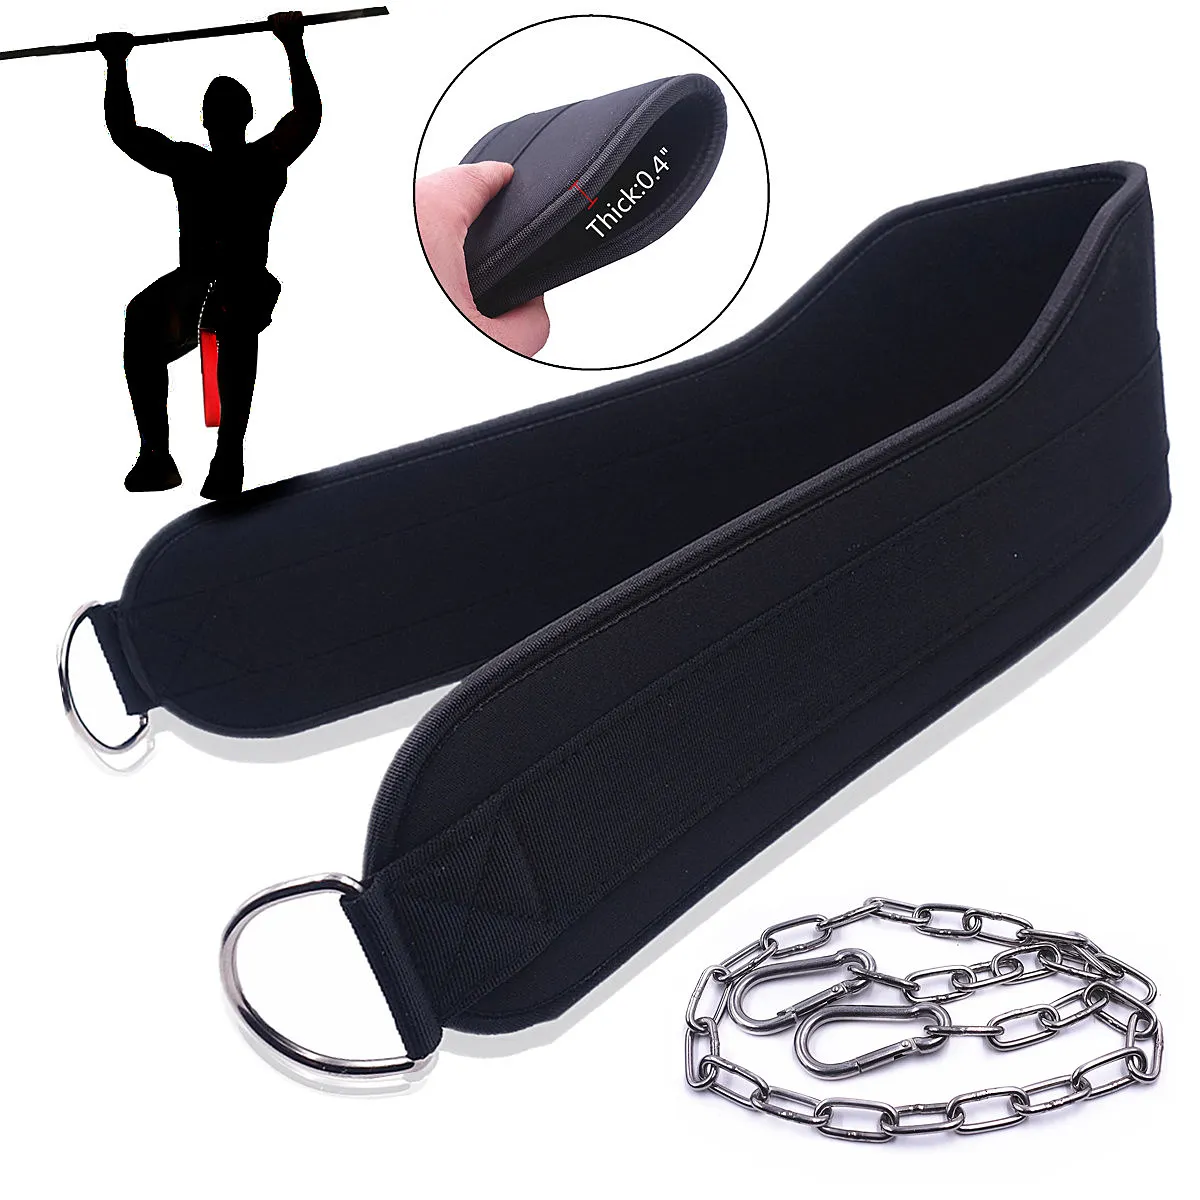 Steel chain belt for weigh lifting belt for cargo submersible belt gym carbine 